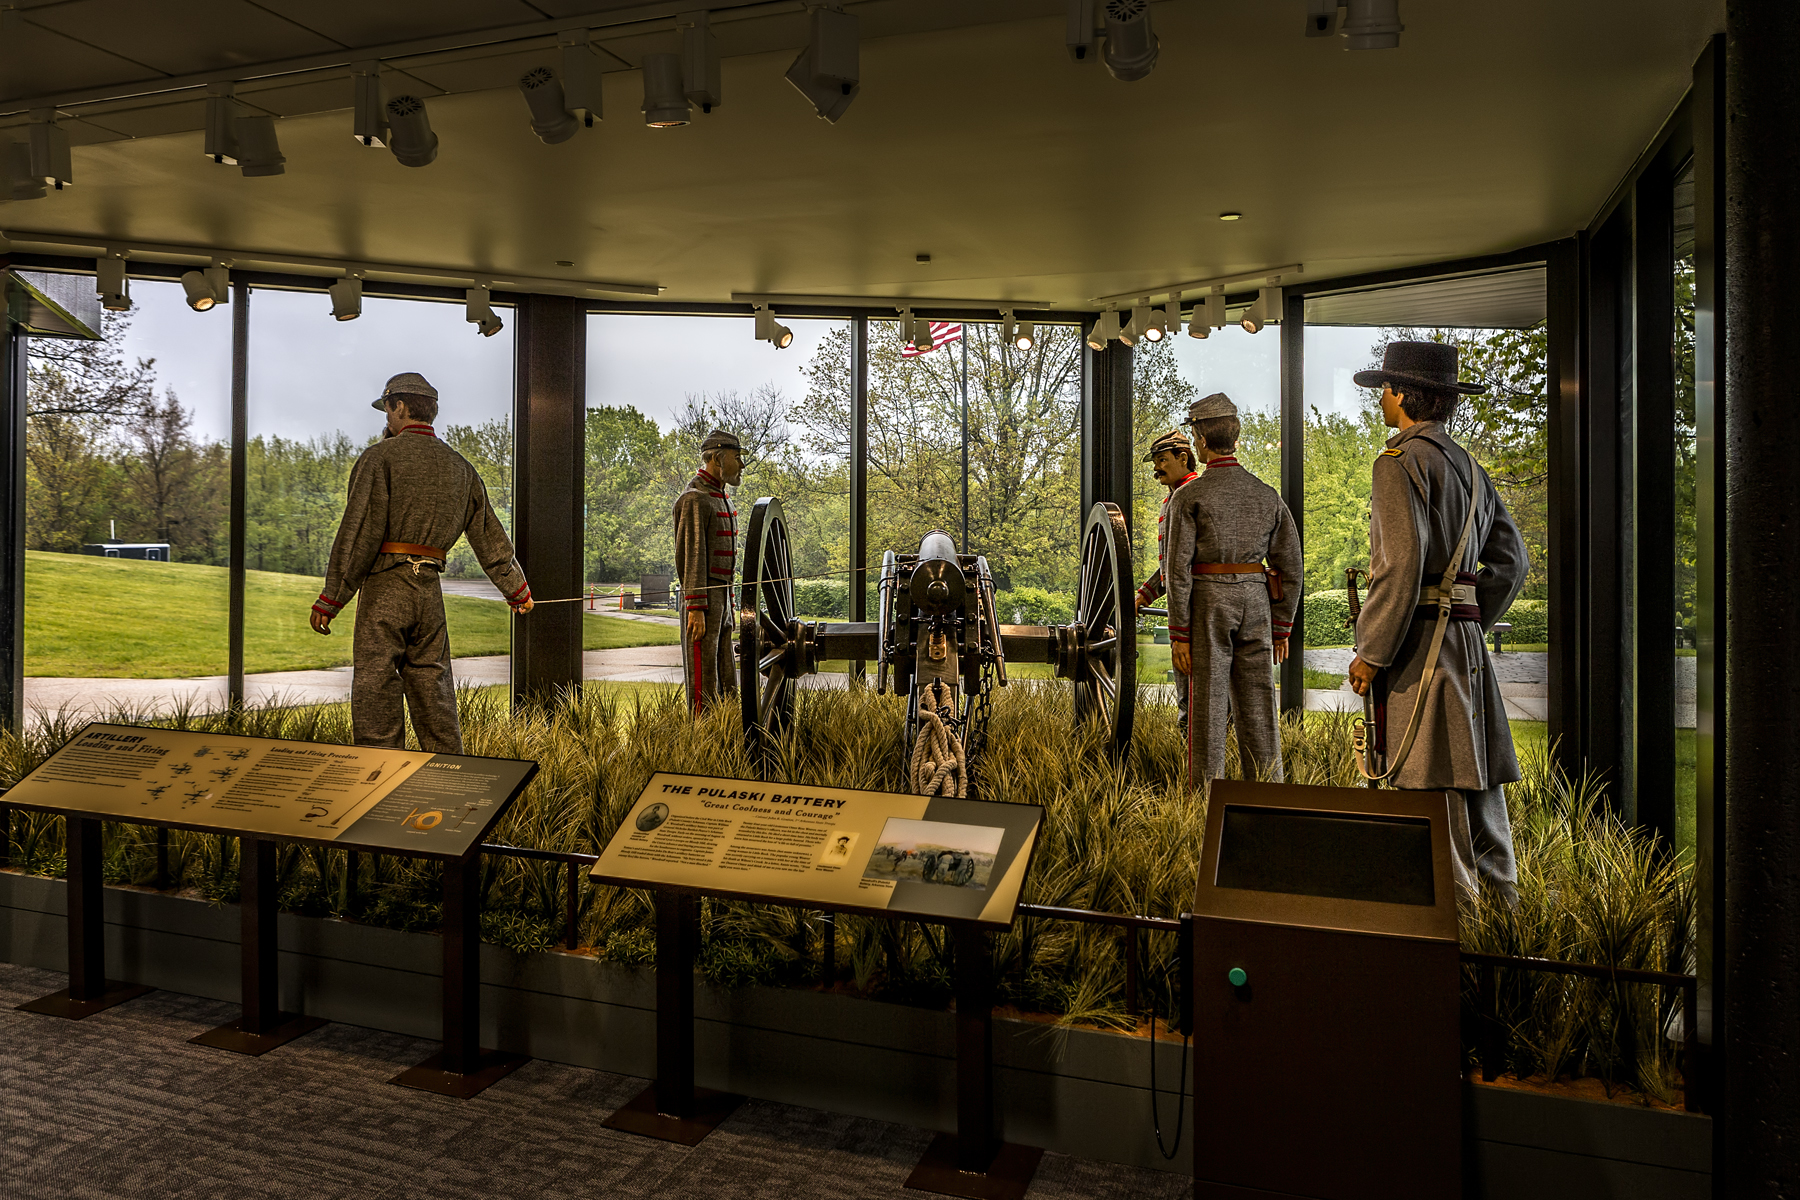 Visitor Center window display featuring a grassy field with 5 cannoneer mannequins in period dress representing The Pulaski Battery in the position of fire at the cannon.